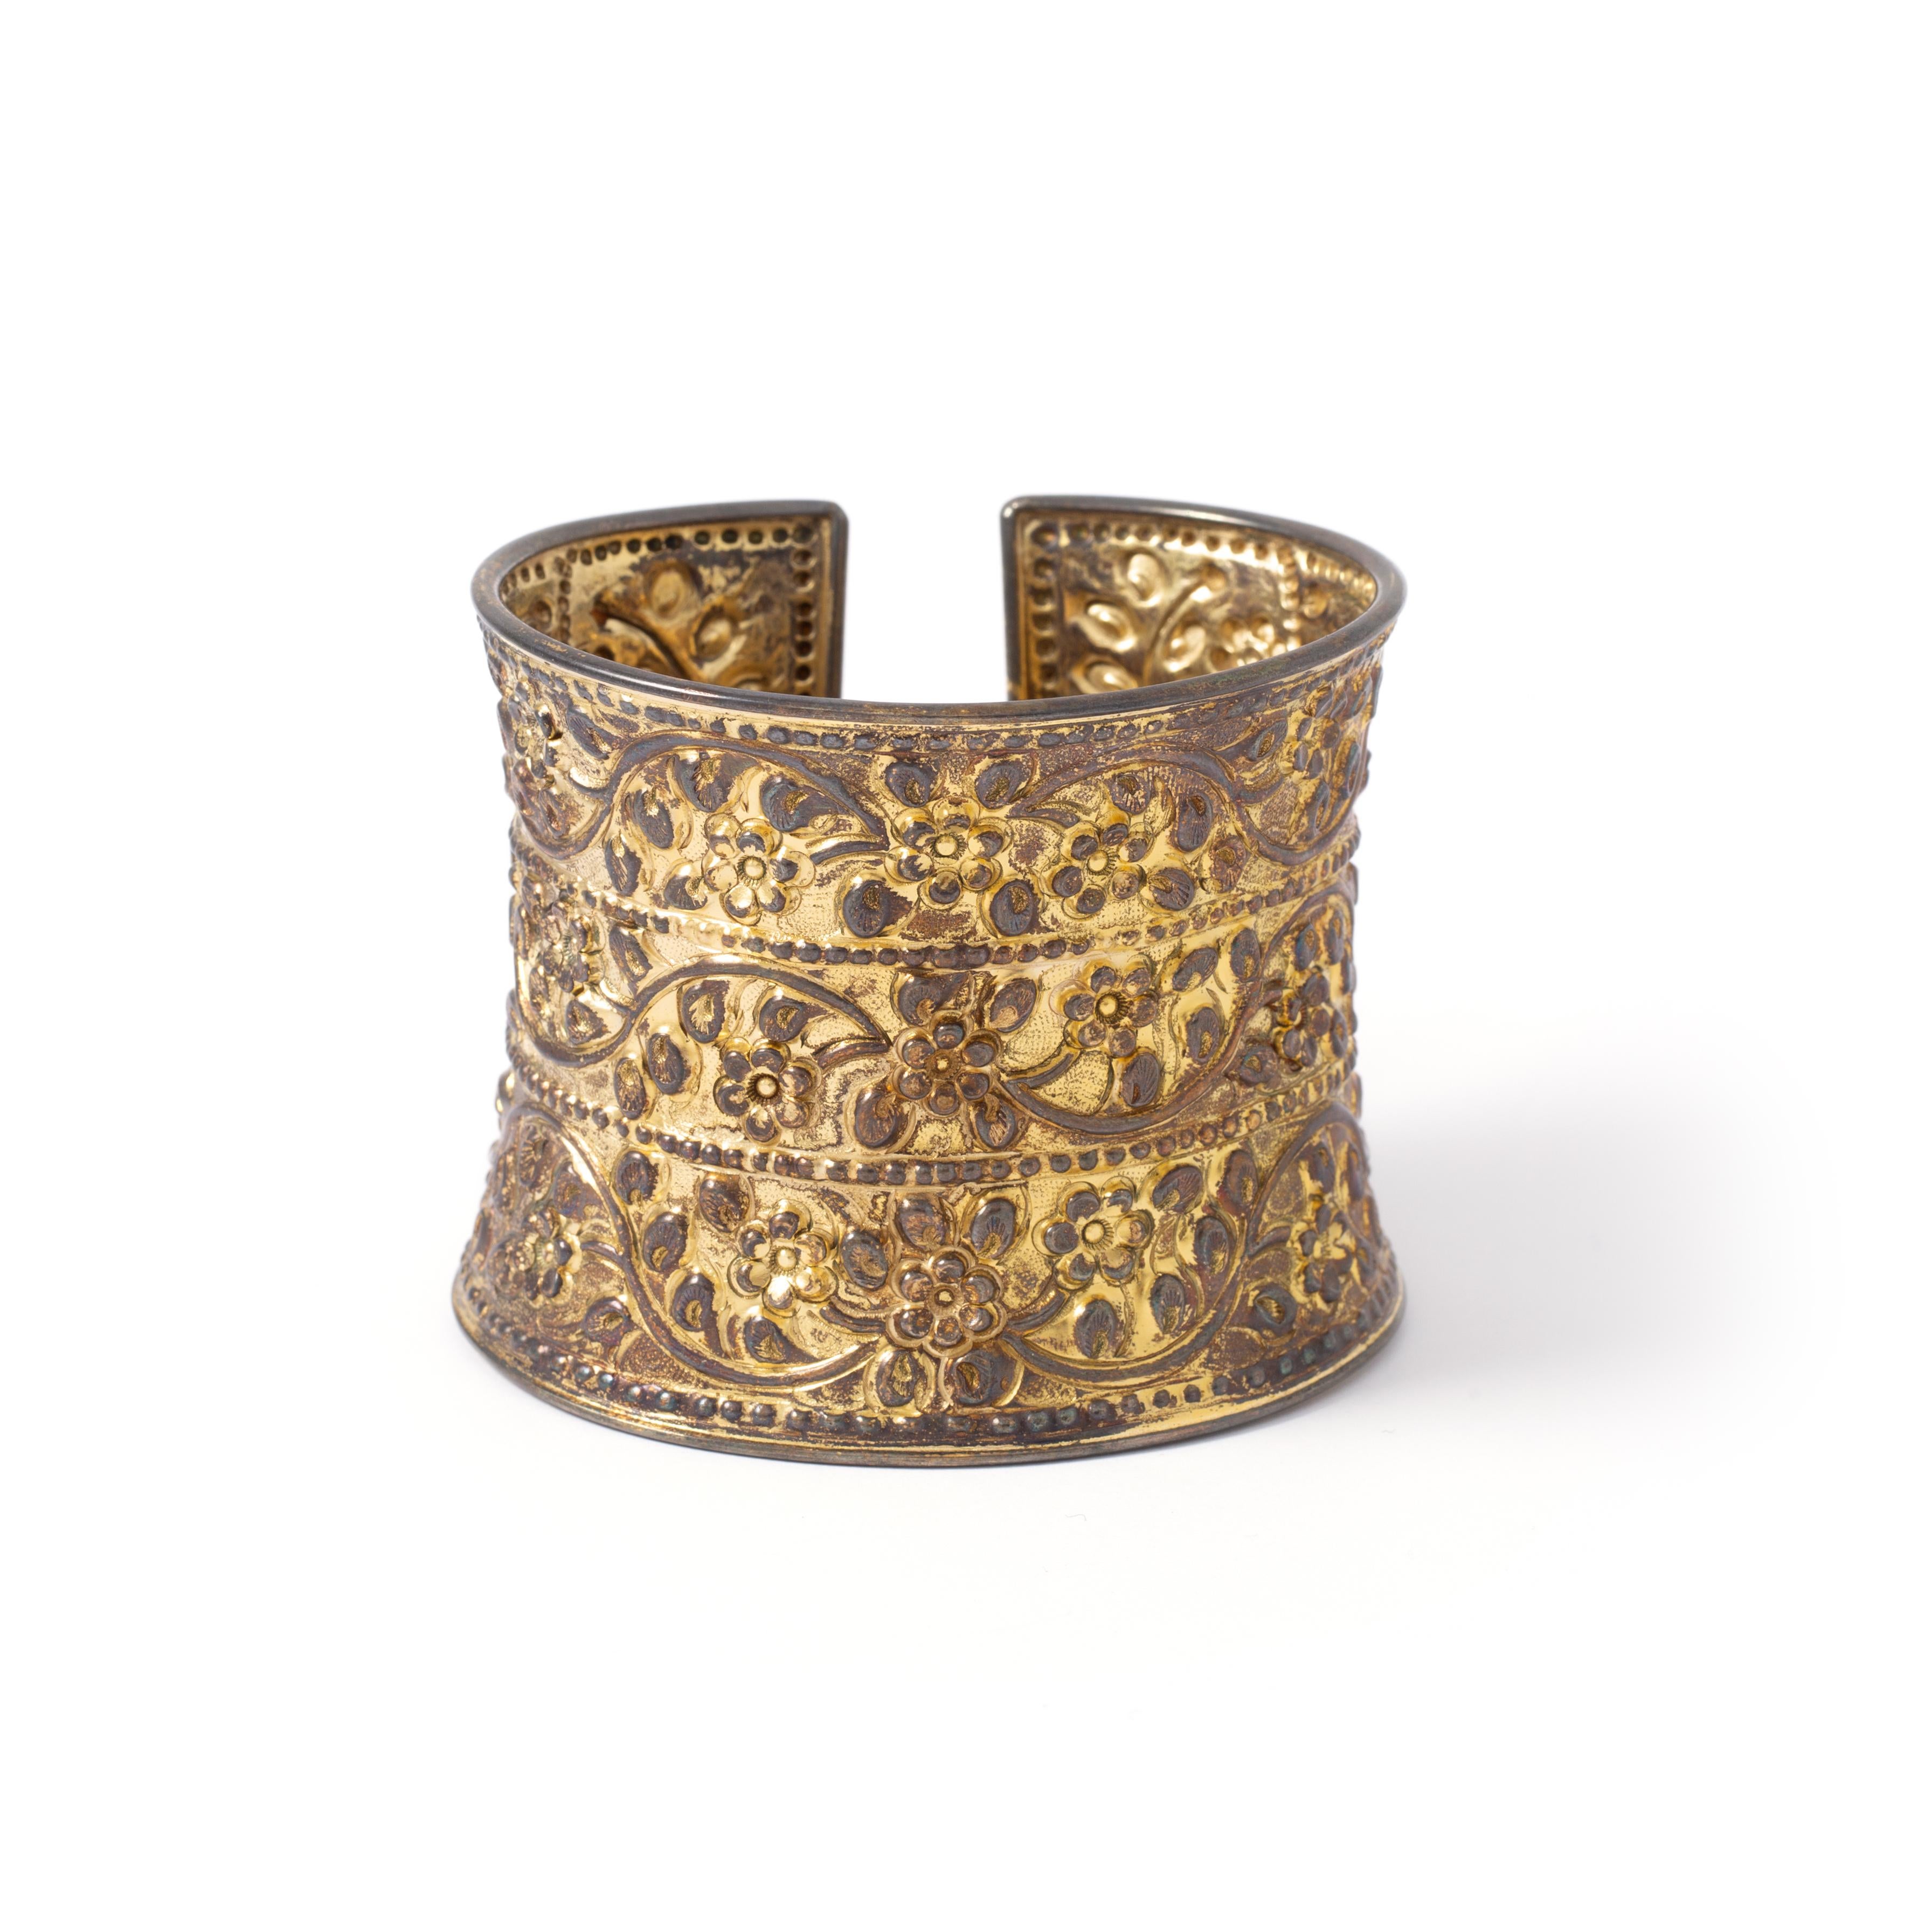 Etruscan Revival Cuff In Good Condition For Sale In Geneva, CH